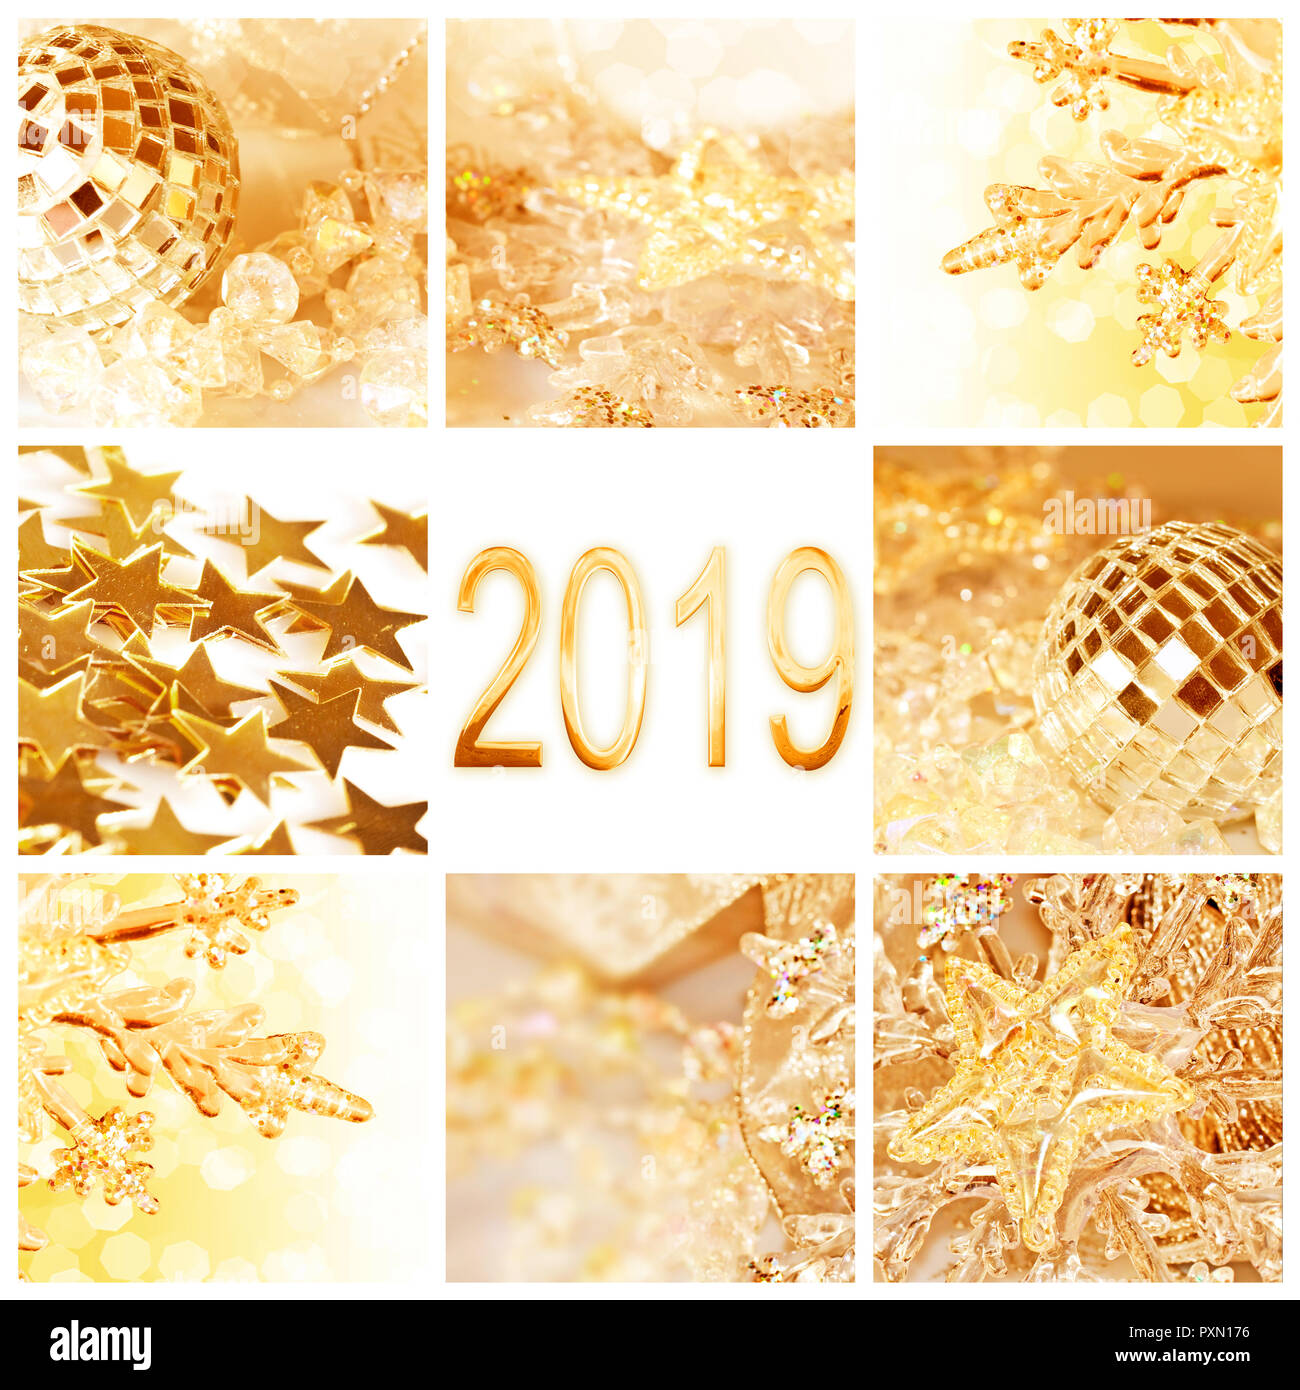 2019, golden christmas ornaments collage square greeting card Stock Photo